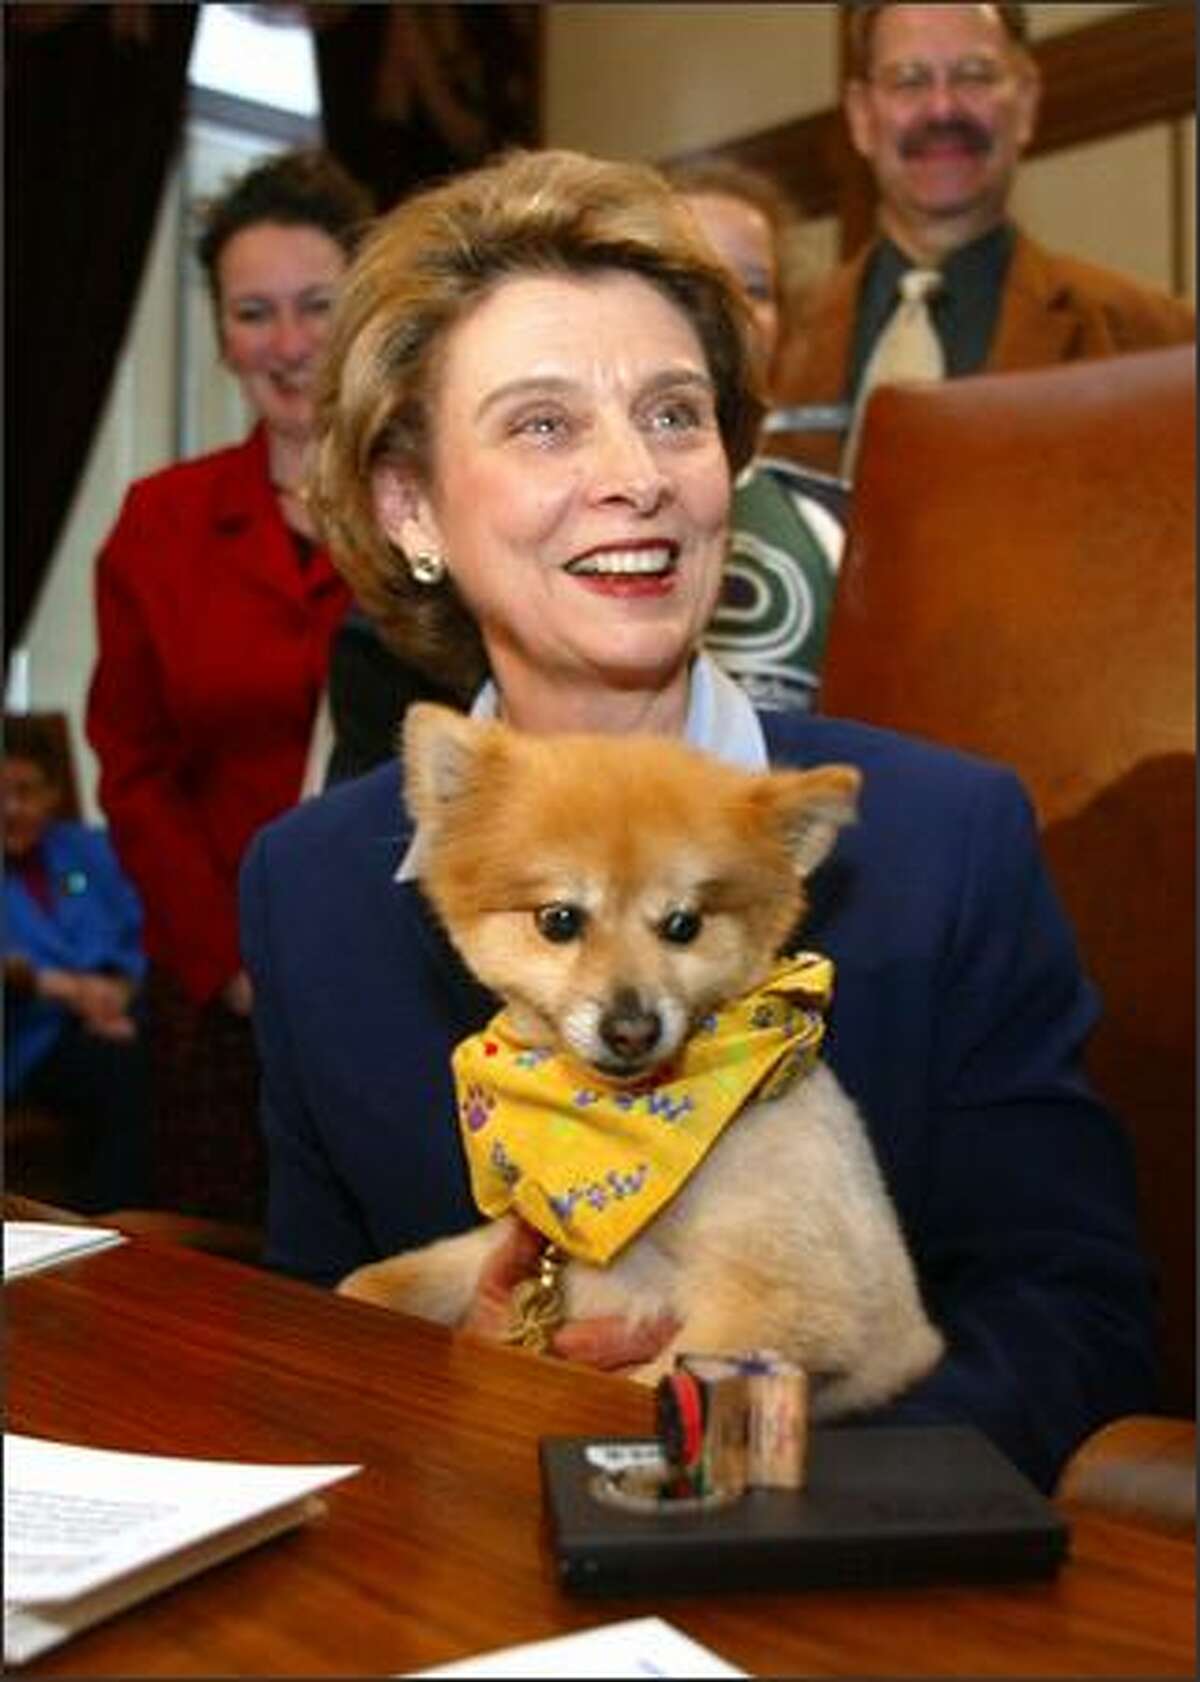 Gov. Chris Gregoire holds"first dog" Franz, a Pomeranian, after signing a bill creating a "We Love Our Pets" auto license in Olympia Wash., on April 18, 2005.